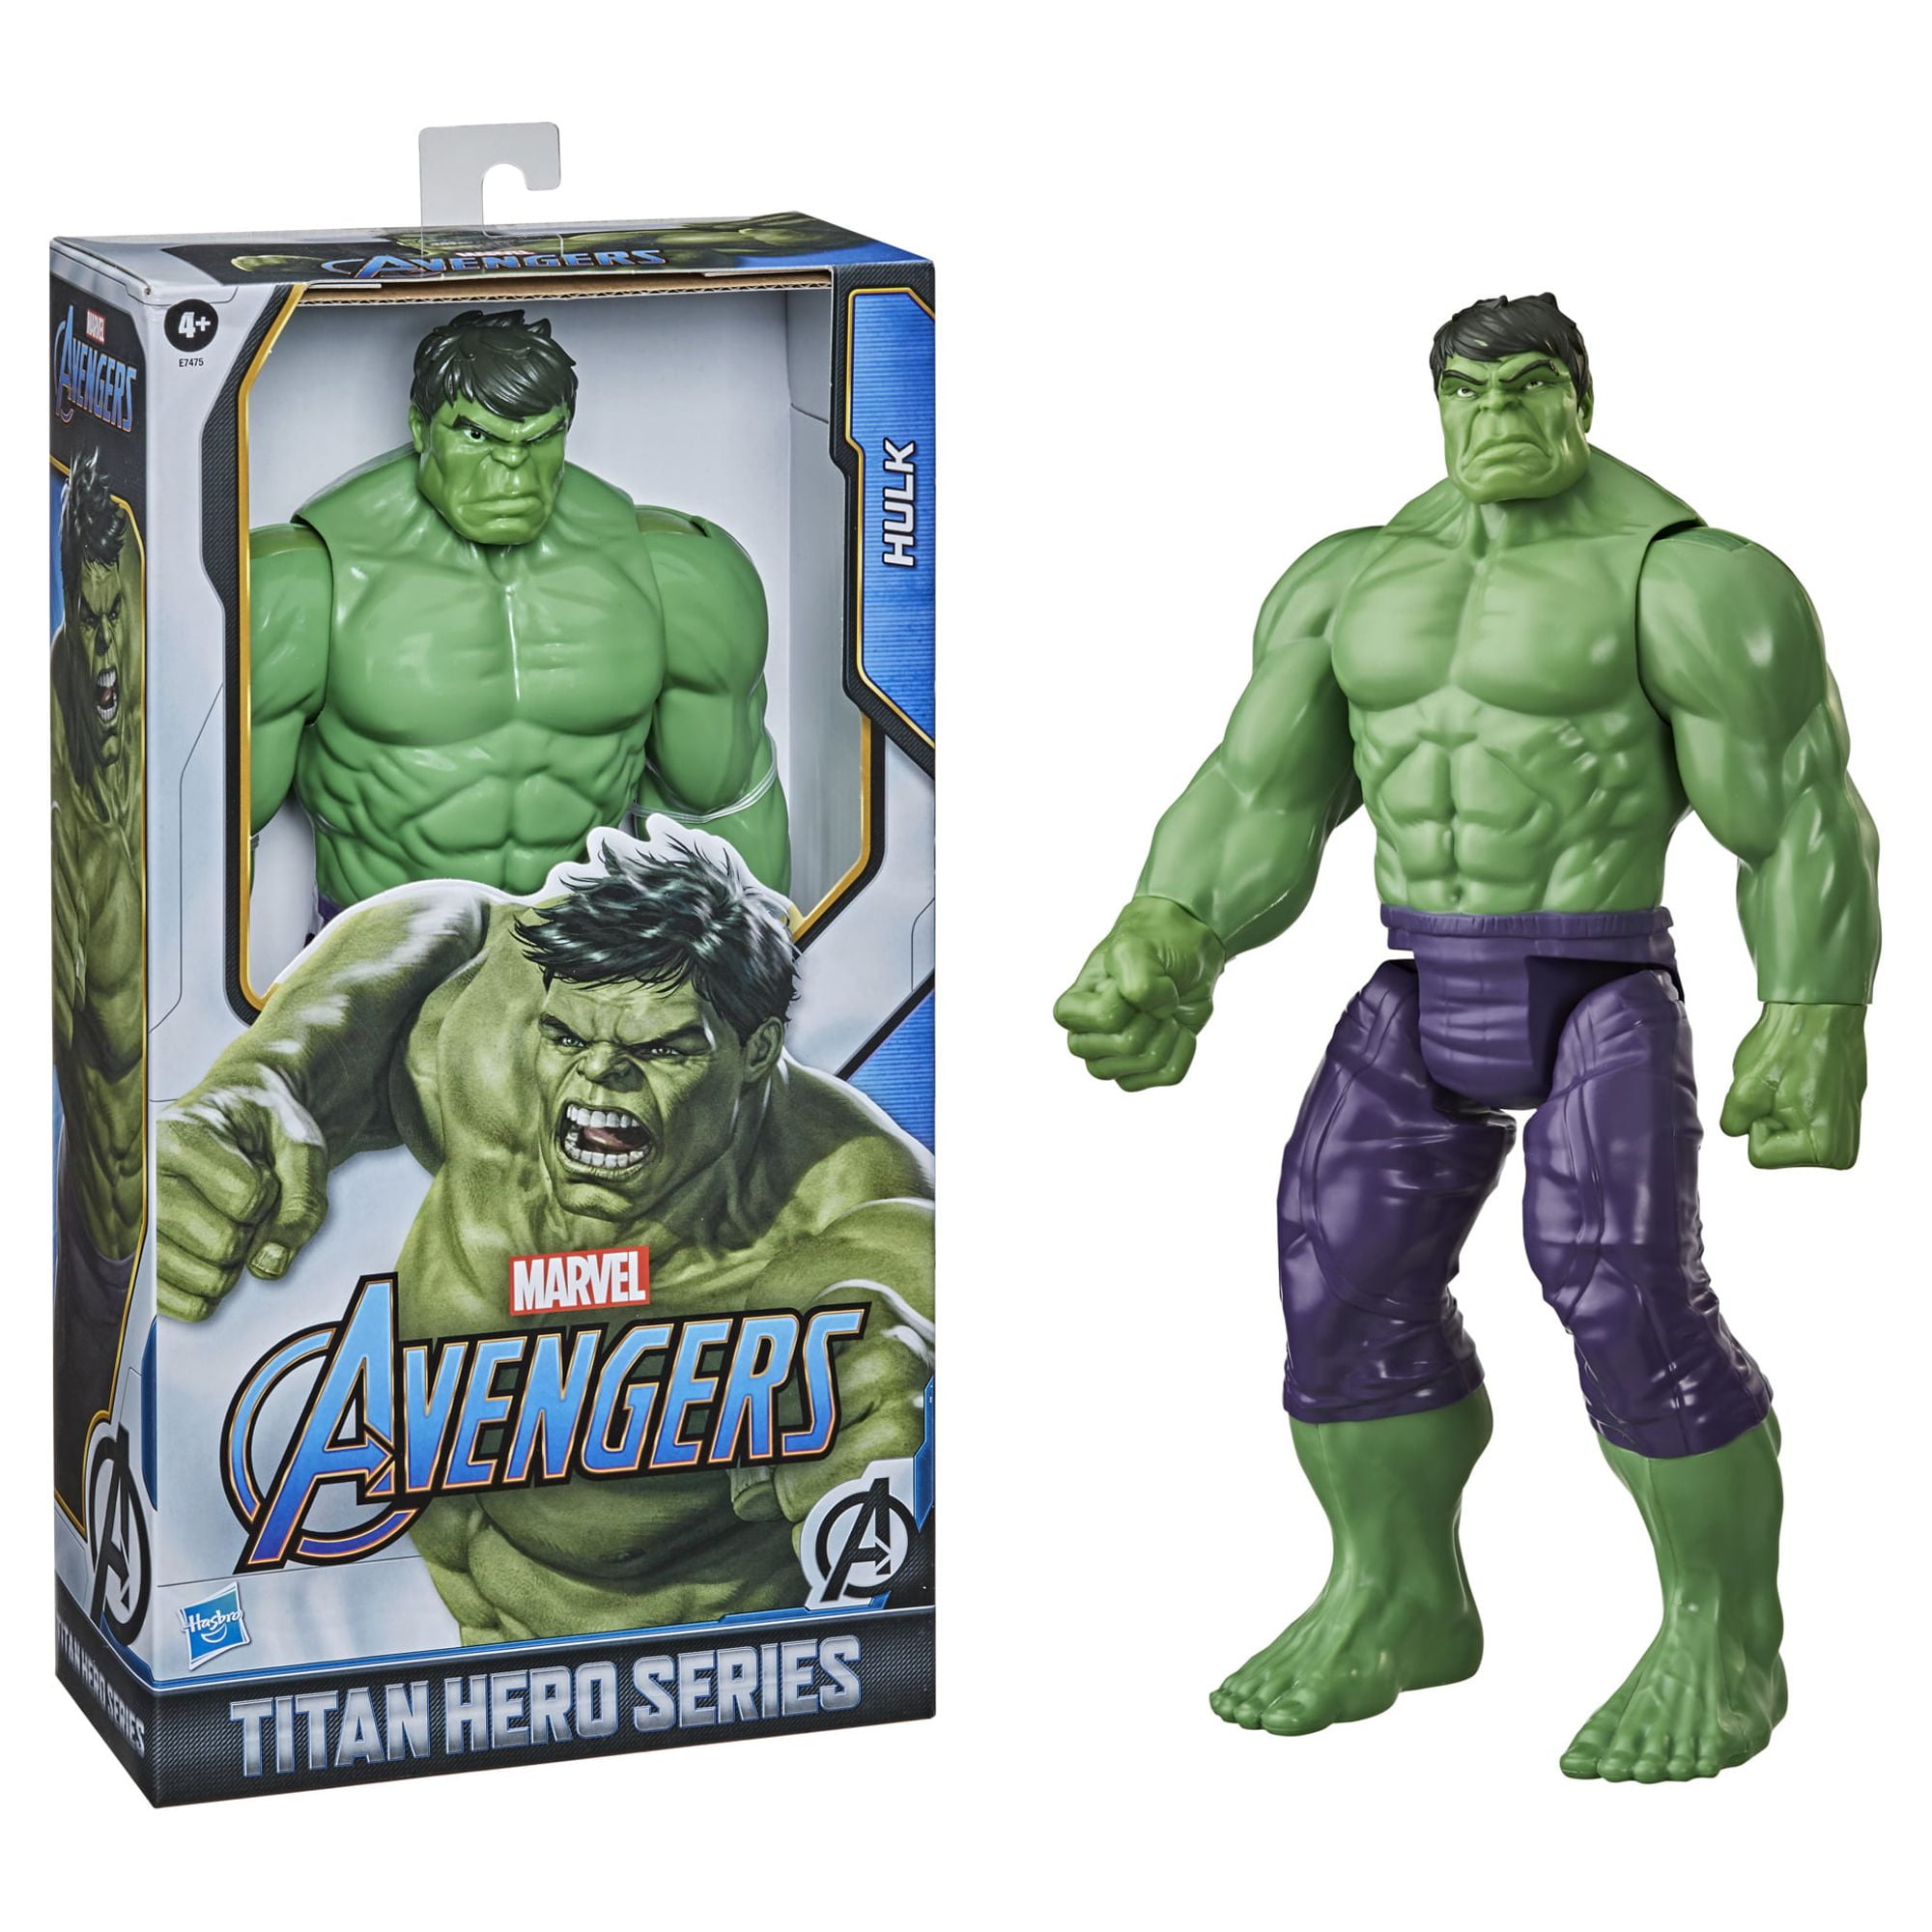 Avengers Marvel Titan Hero Series Blast Gear Deluxe Hulk Action Figure,  12-Inch Toy, Inspired by Marvel Comics, for Kids Ages 4 and Up , Green